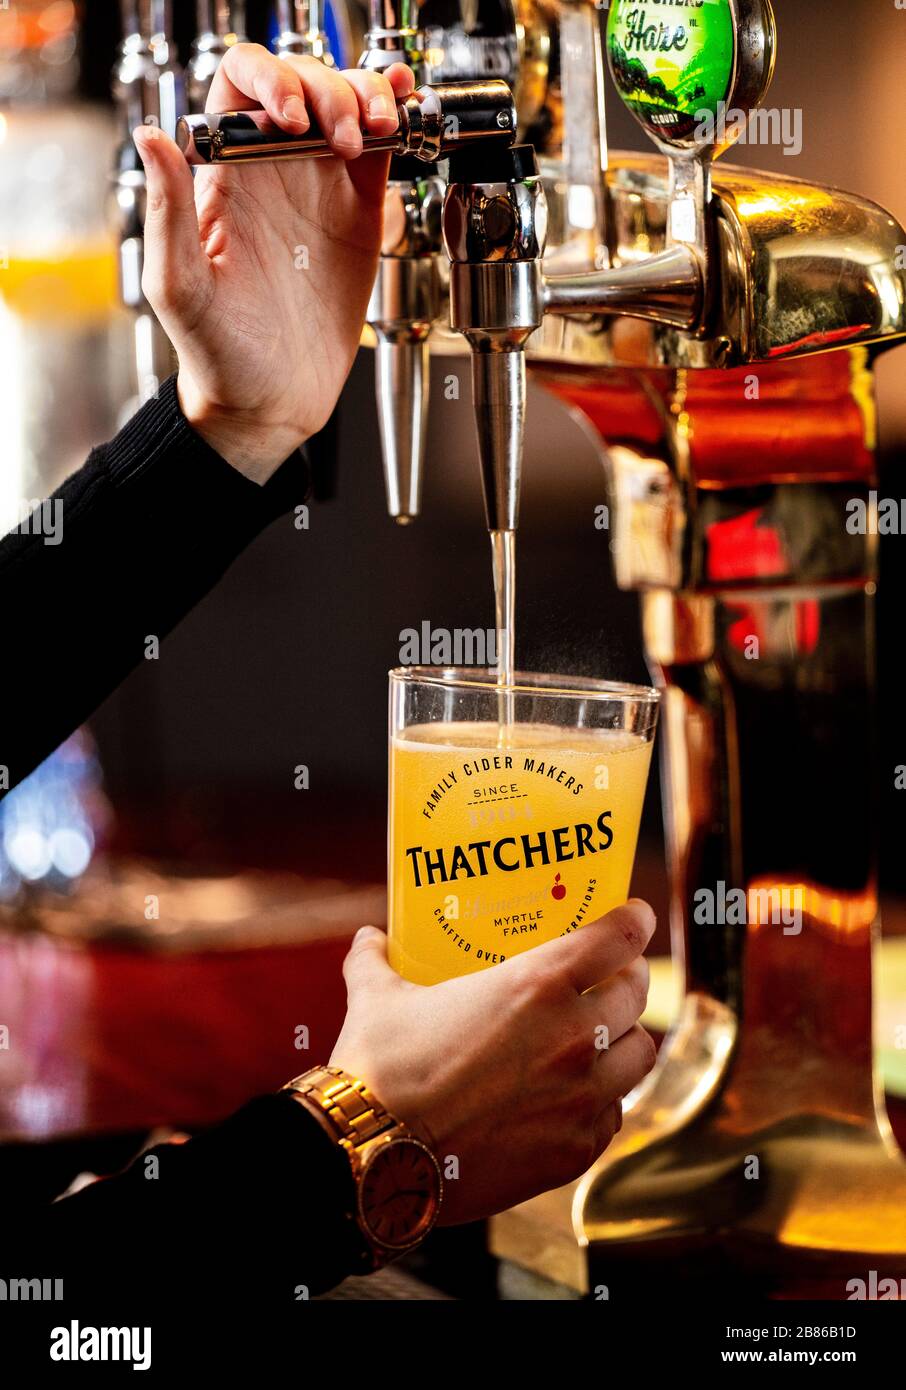 A glass of Thatchers Cider. Stock Photo